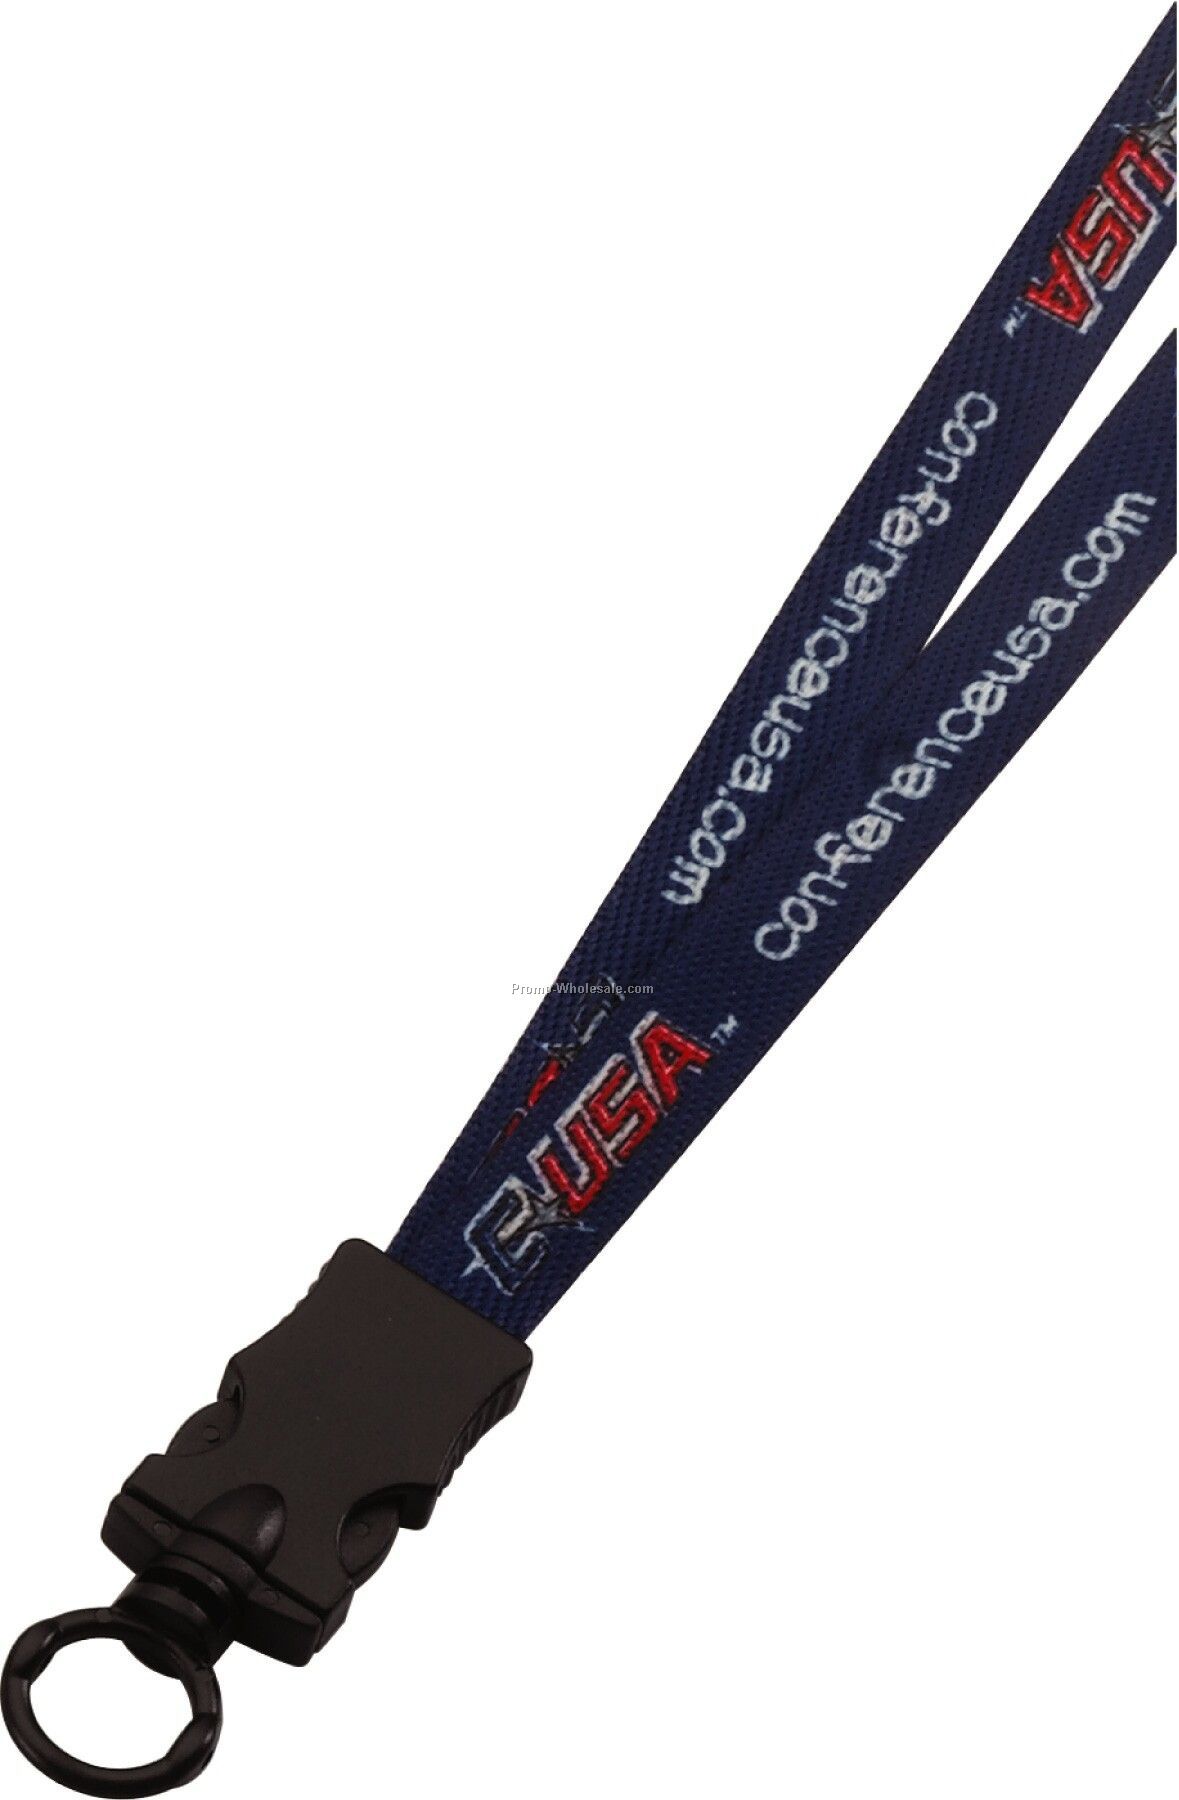 1/2" Waffle Weave Dye Sublimated Lanyard With Snap Buckle Release & O-ring